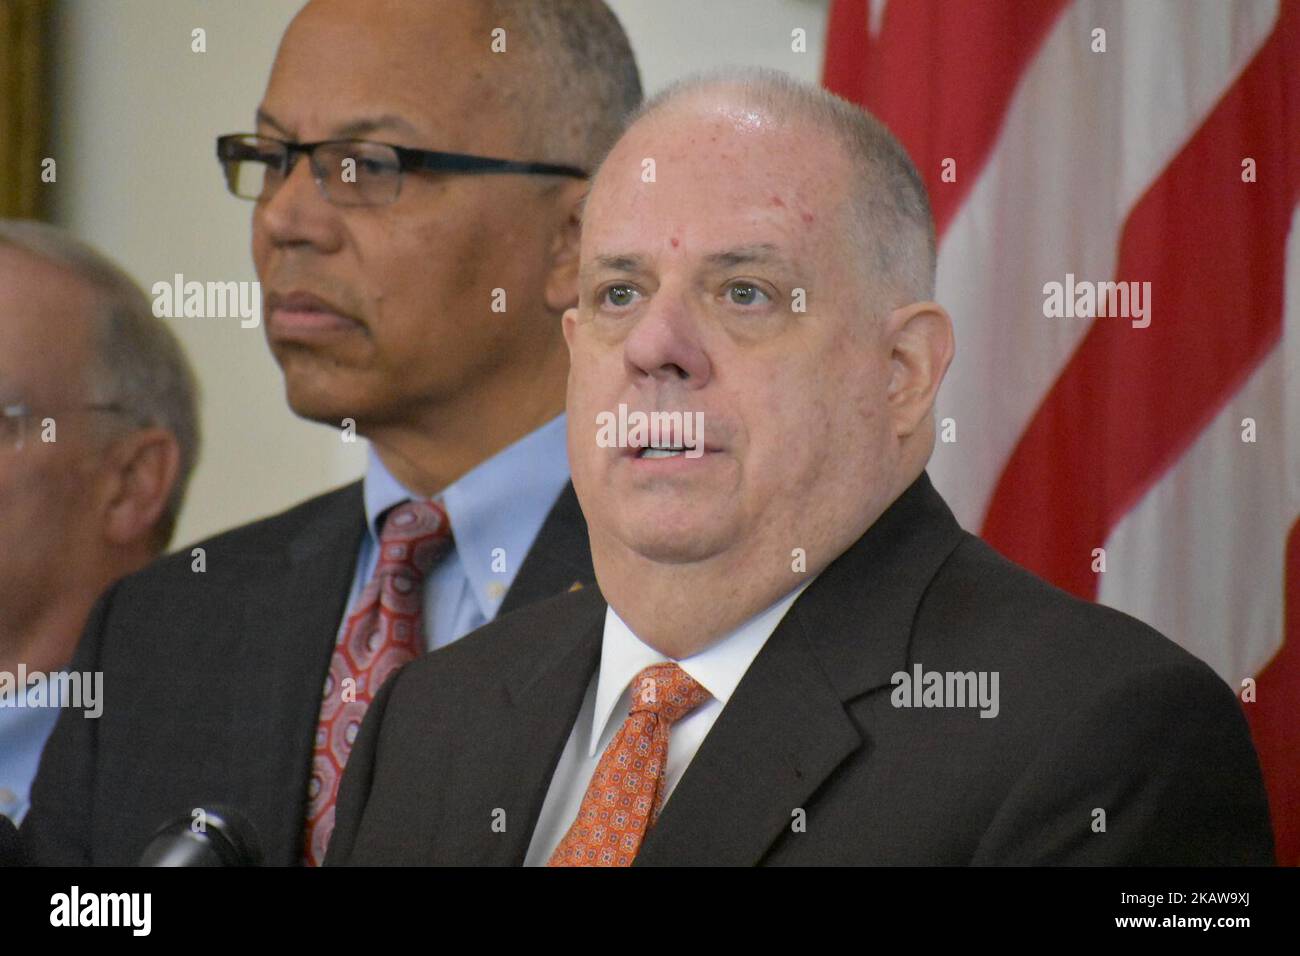 Maryland Governor Larry Hogan holds a press conference in the Governor's Reception Room at the Maryland State House in Annapolis, M.D. on January 25, 2018 (Photo by Kyle Mazza/NurPhoto) Stock Photo